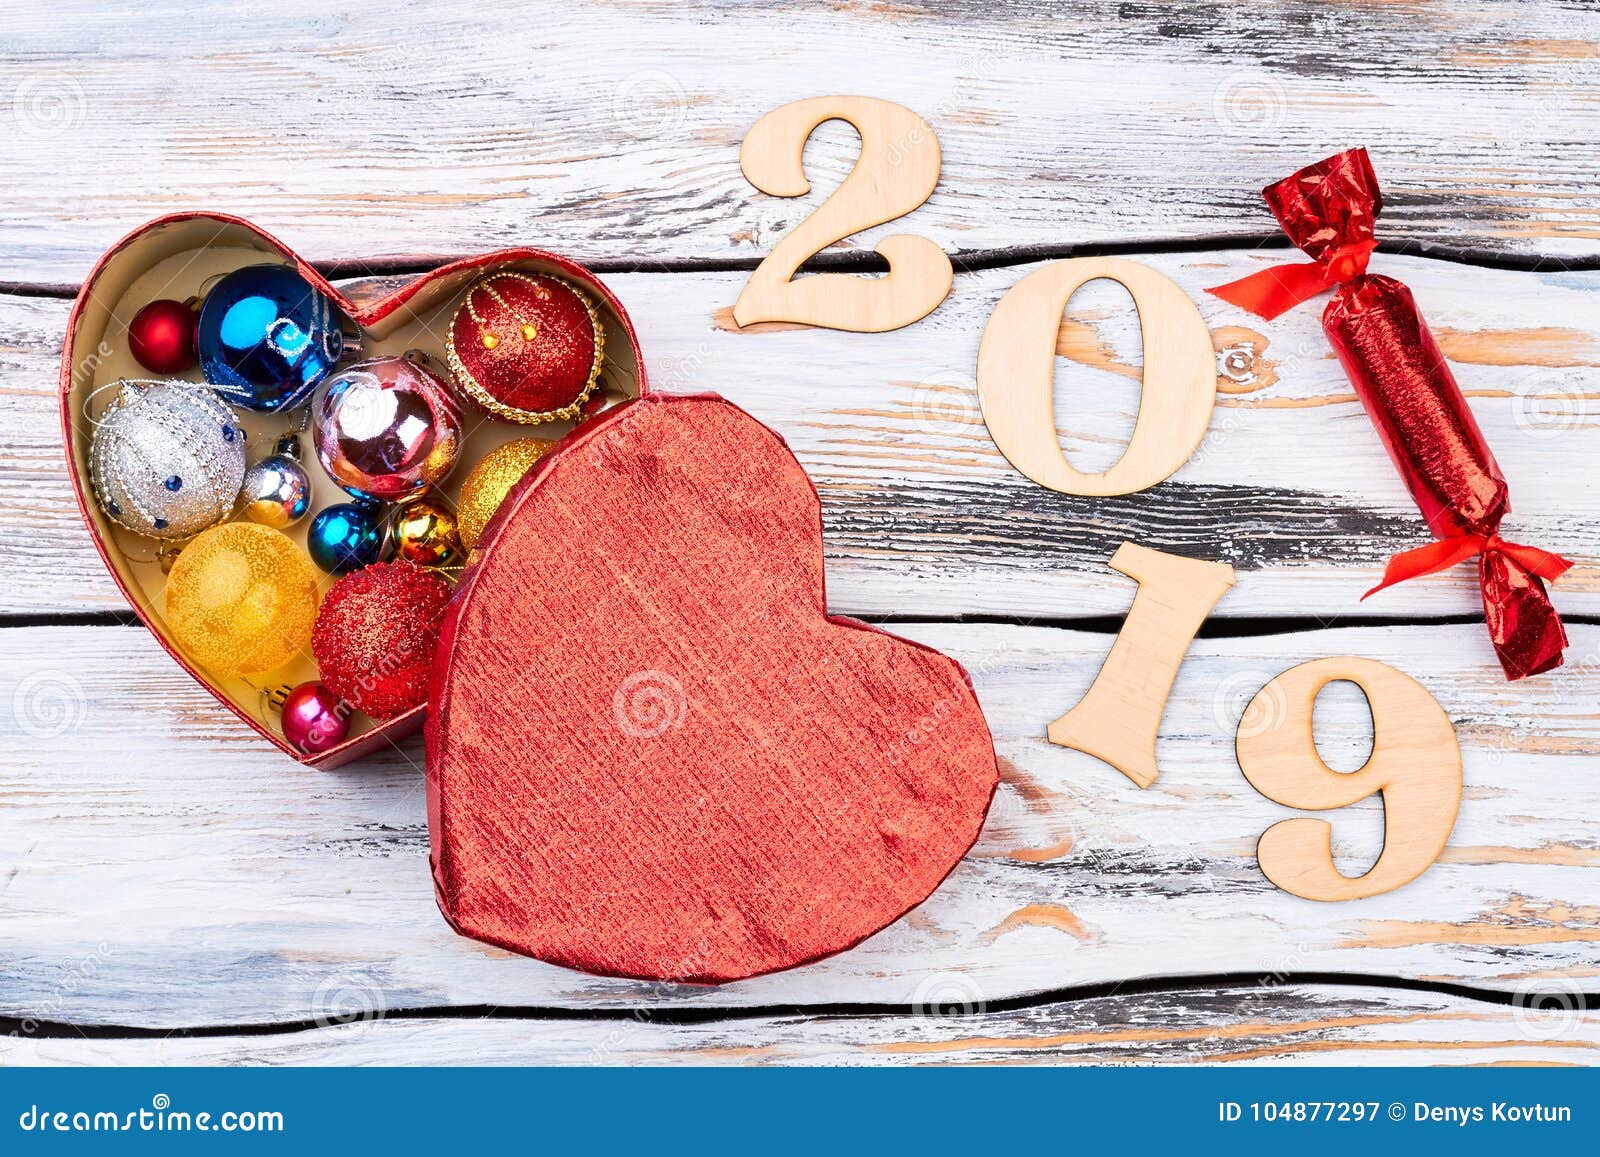 New Year 19 Wooden Background Stock Image Image Of Bright Event